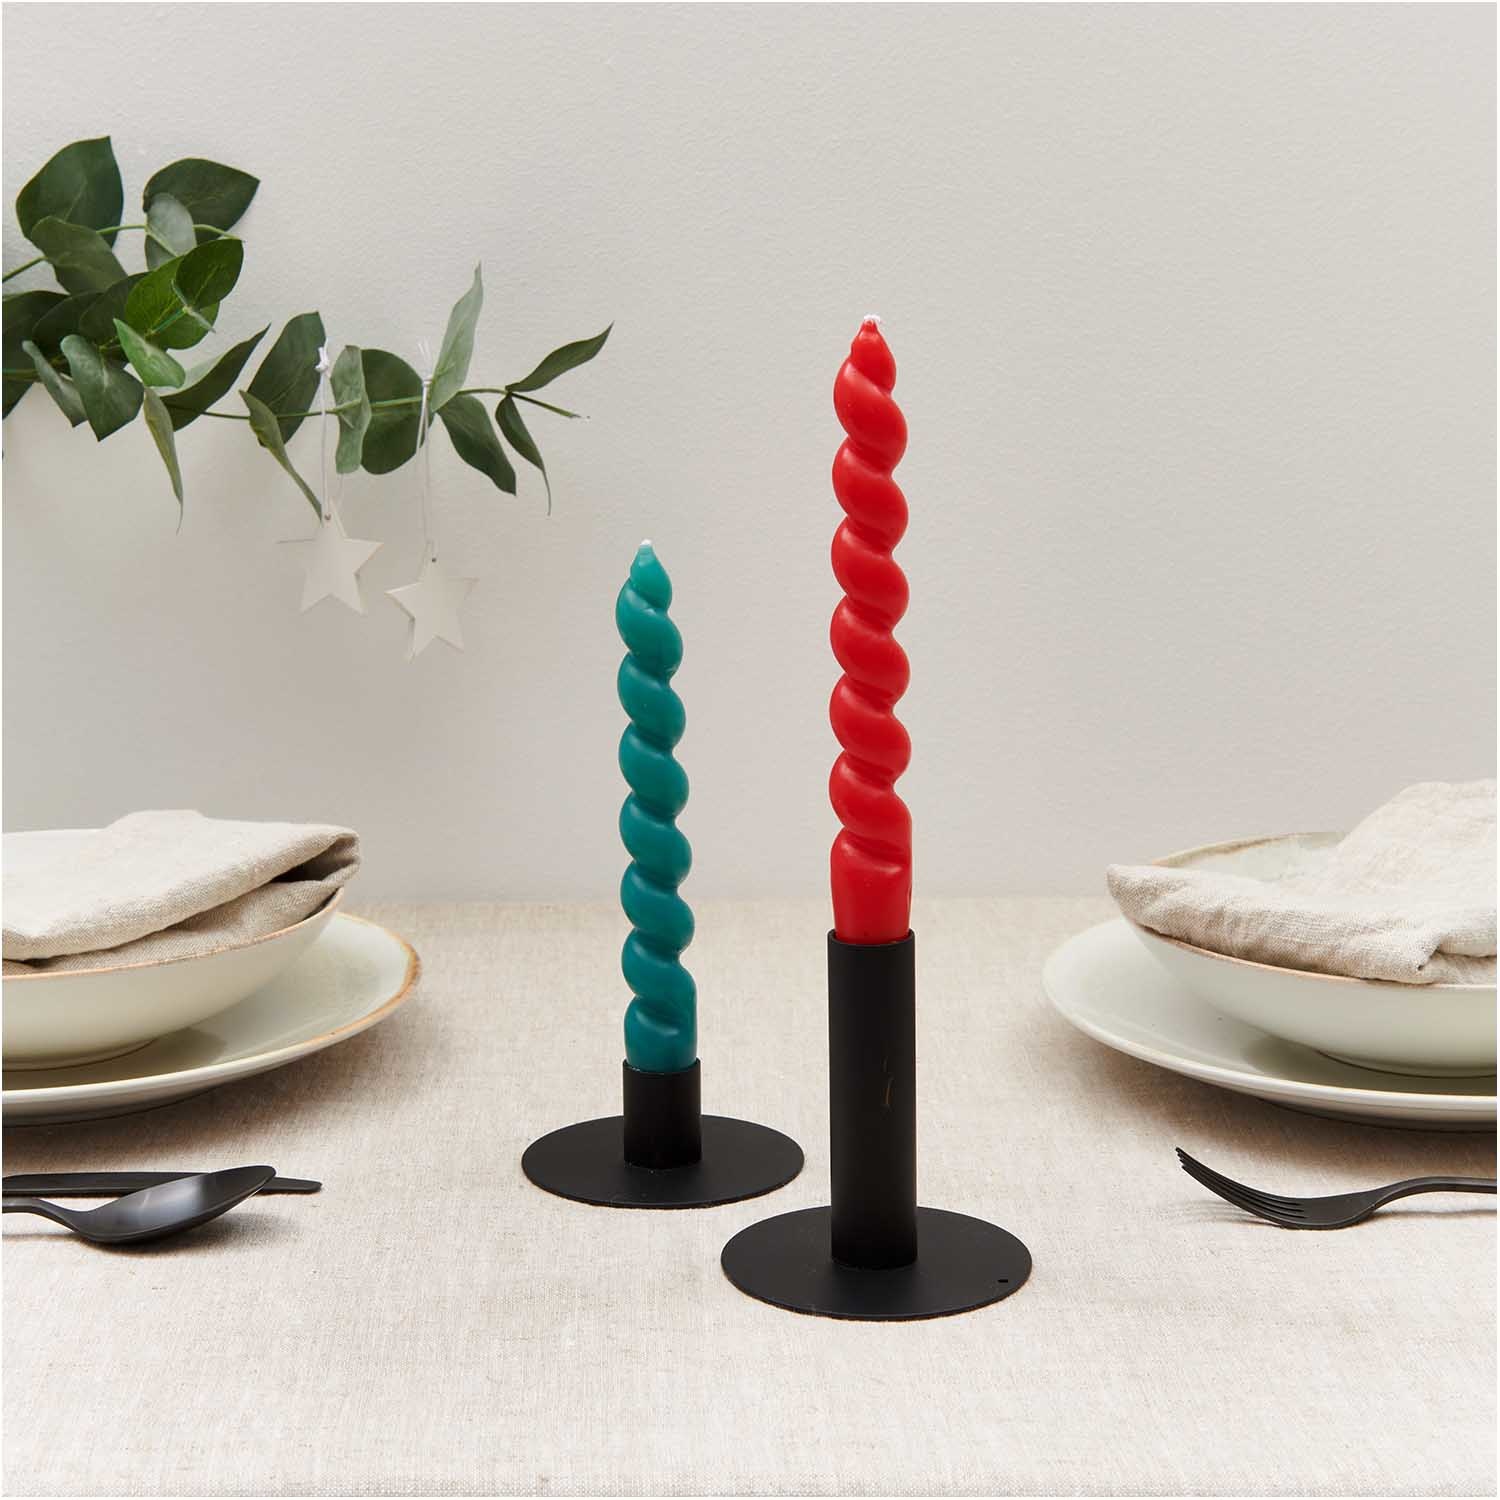 RICO Spiral candle, red, 1 pc, Ø 2,4 cm x 18,5 cm height